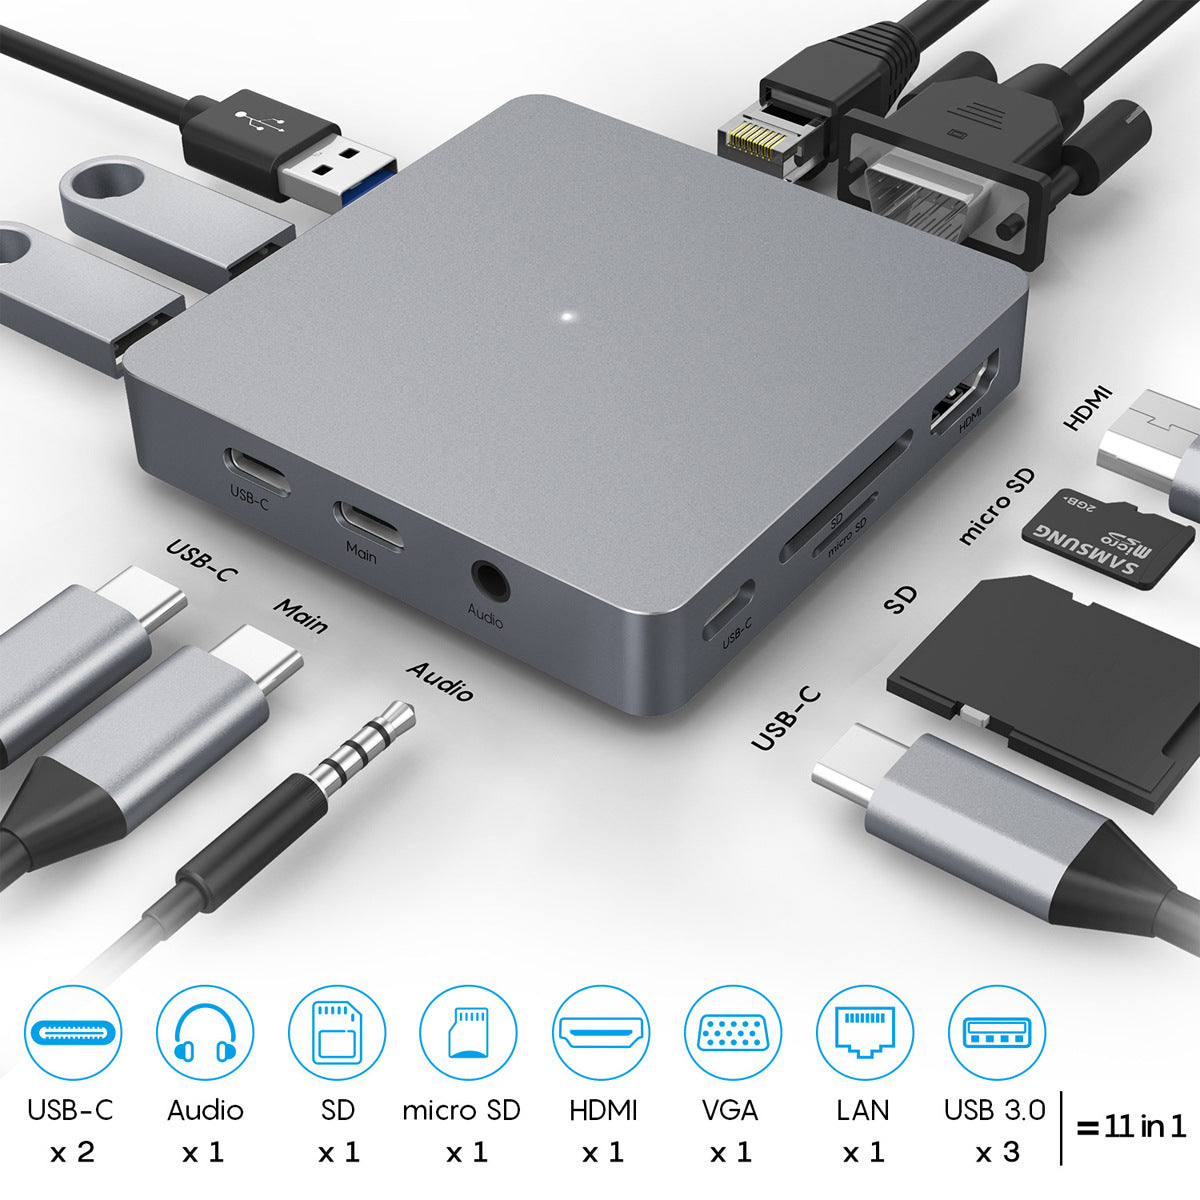 Type-C Docking Station with Multiple Ports: HDMI, VGA, RJ45, USB 3.0, and More